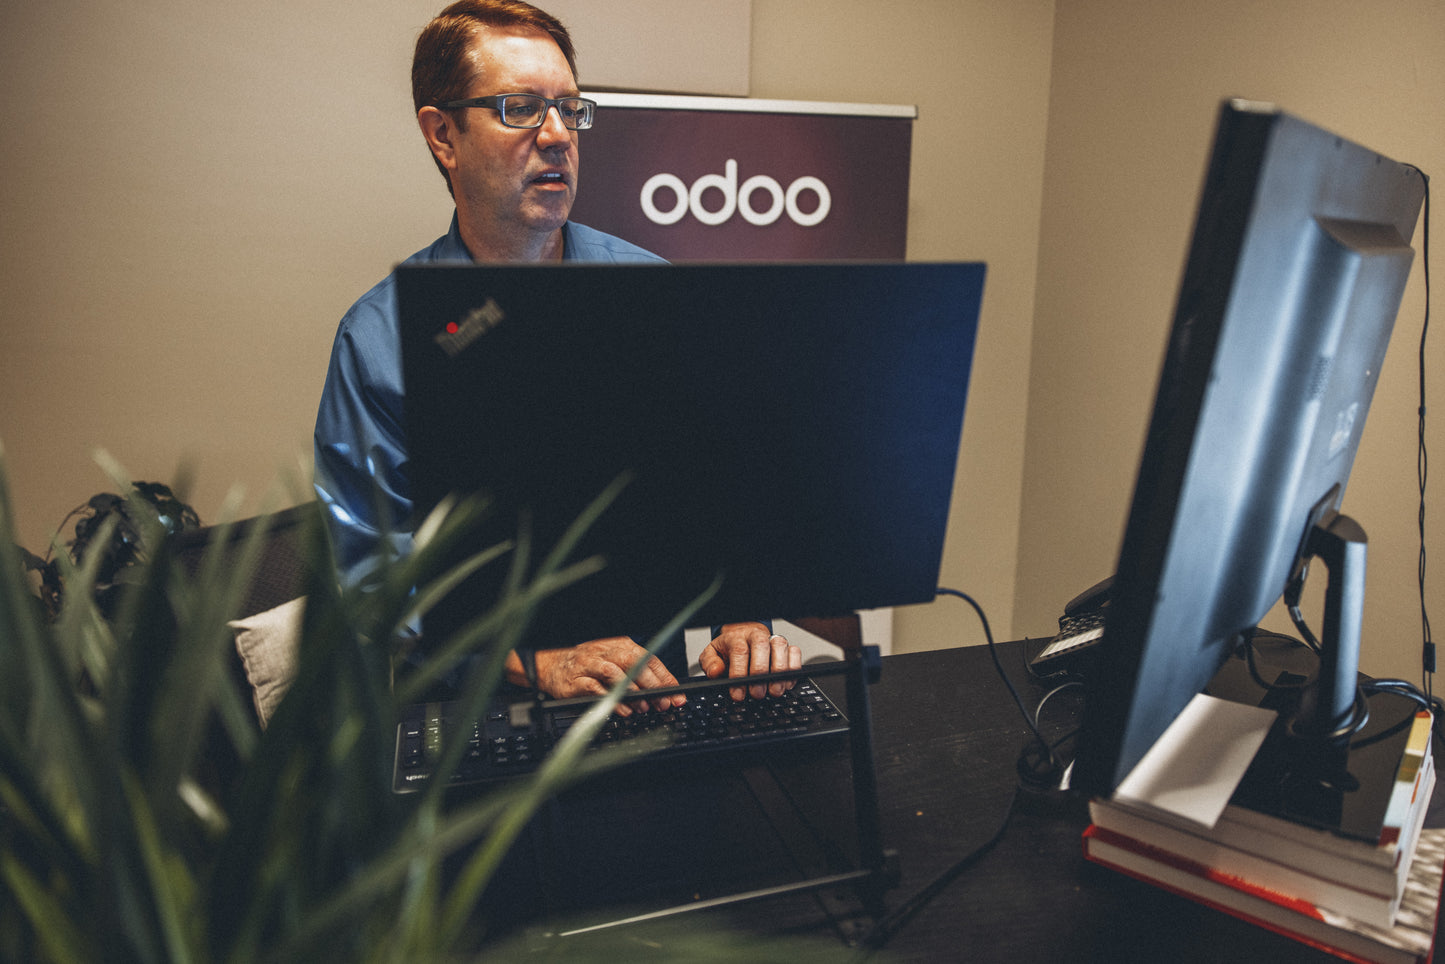 Odoo Sales, E-commerce, and Marketing Automation Bootcamp